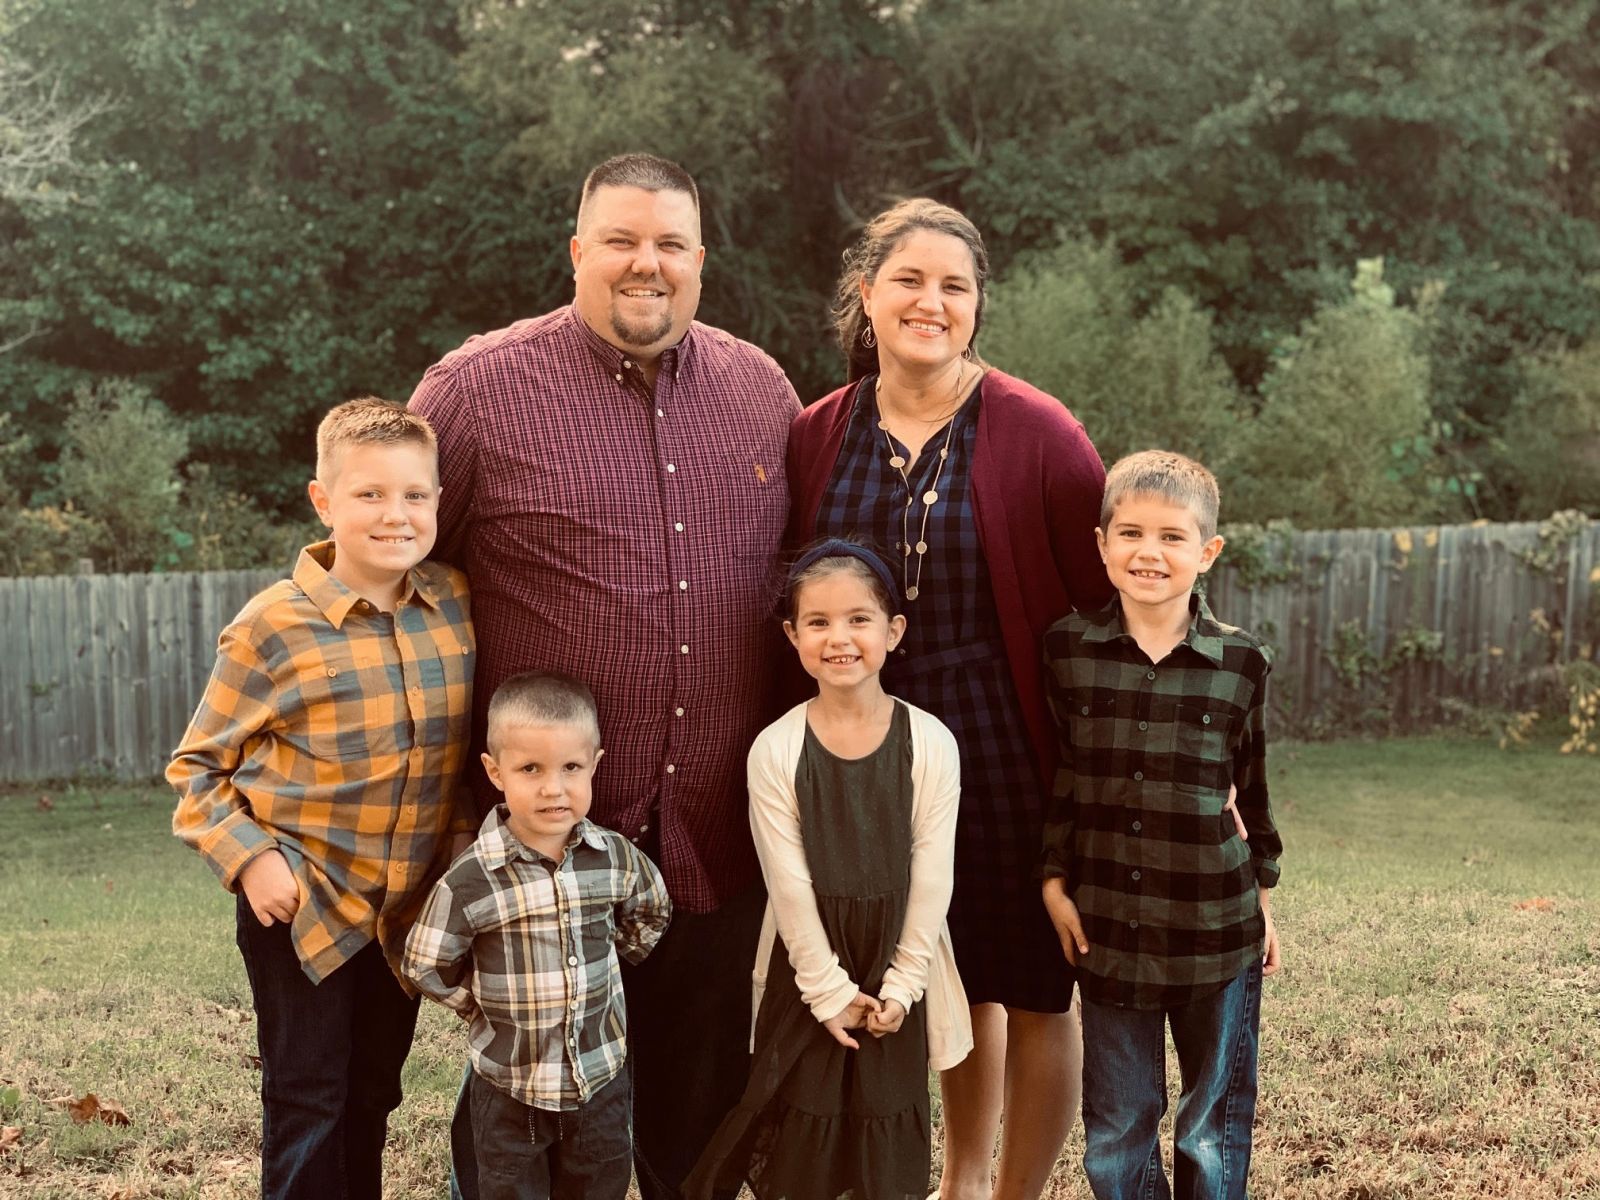 Pastor Kyle Wellmaker with his wife and children